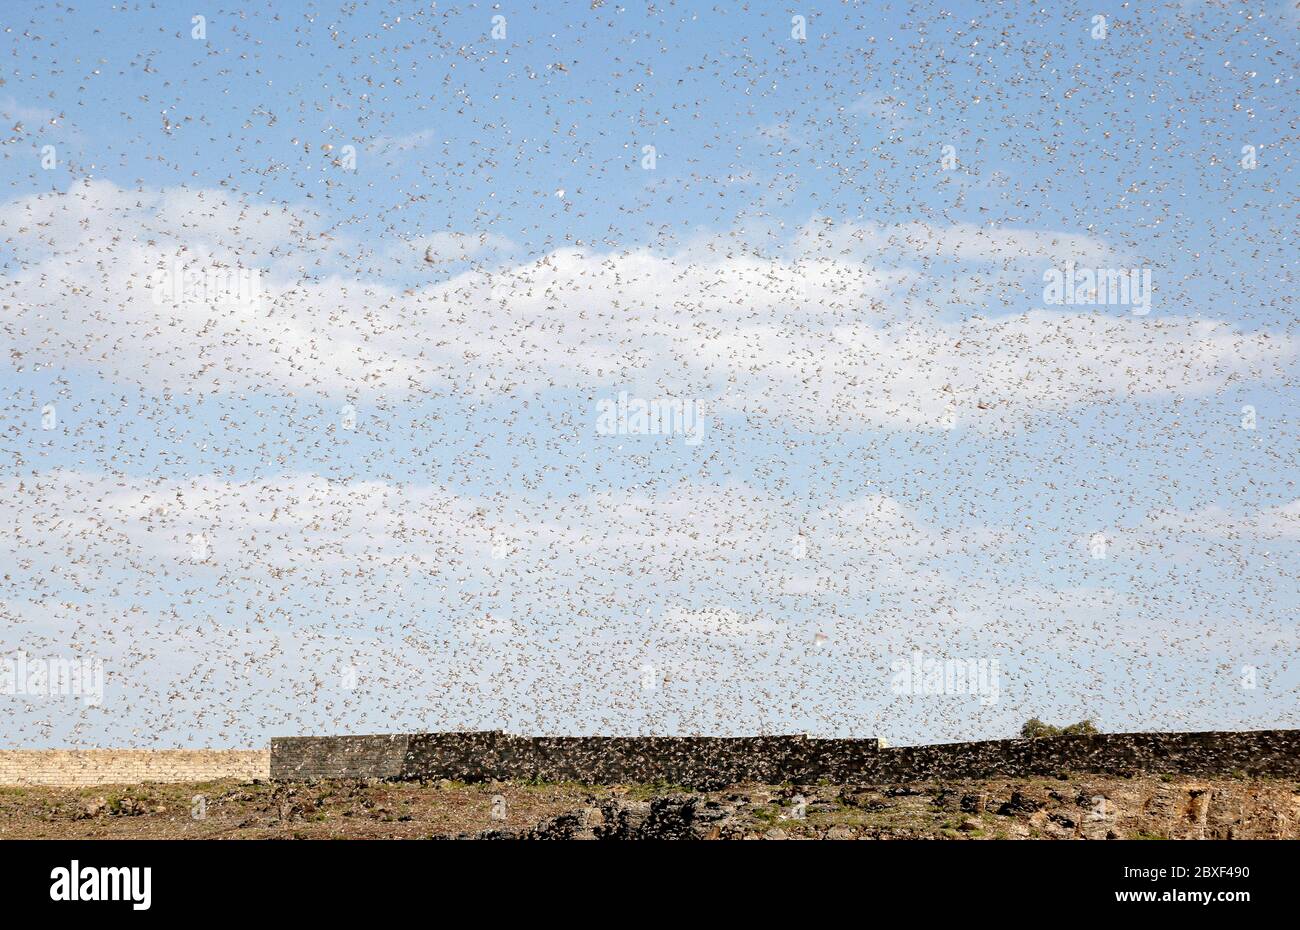 Dhamar, Yemen. 6th June, 2020. Locusts are seen in the air as they arrive at a cultivation area in Dhamar province, Yemen, on June 6, 2020. Credit: Mohammed Mohammed/Xinhua/Alamy Live News Stock Photo